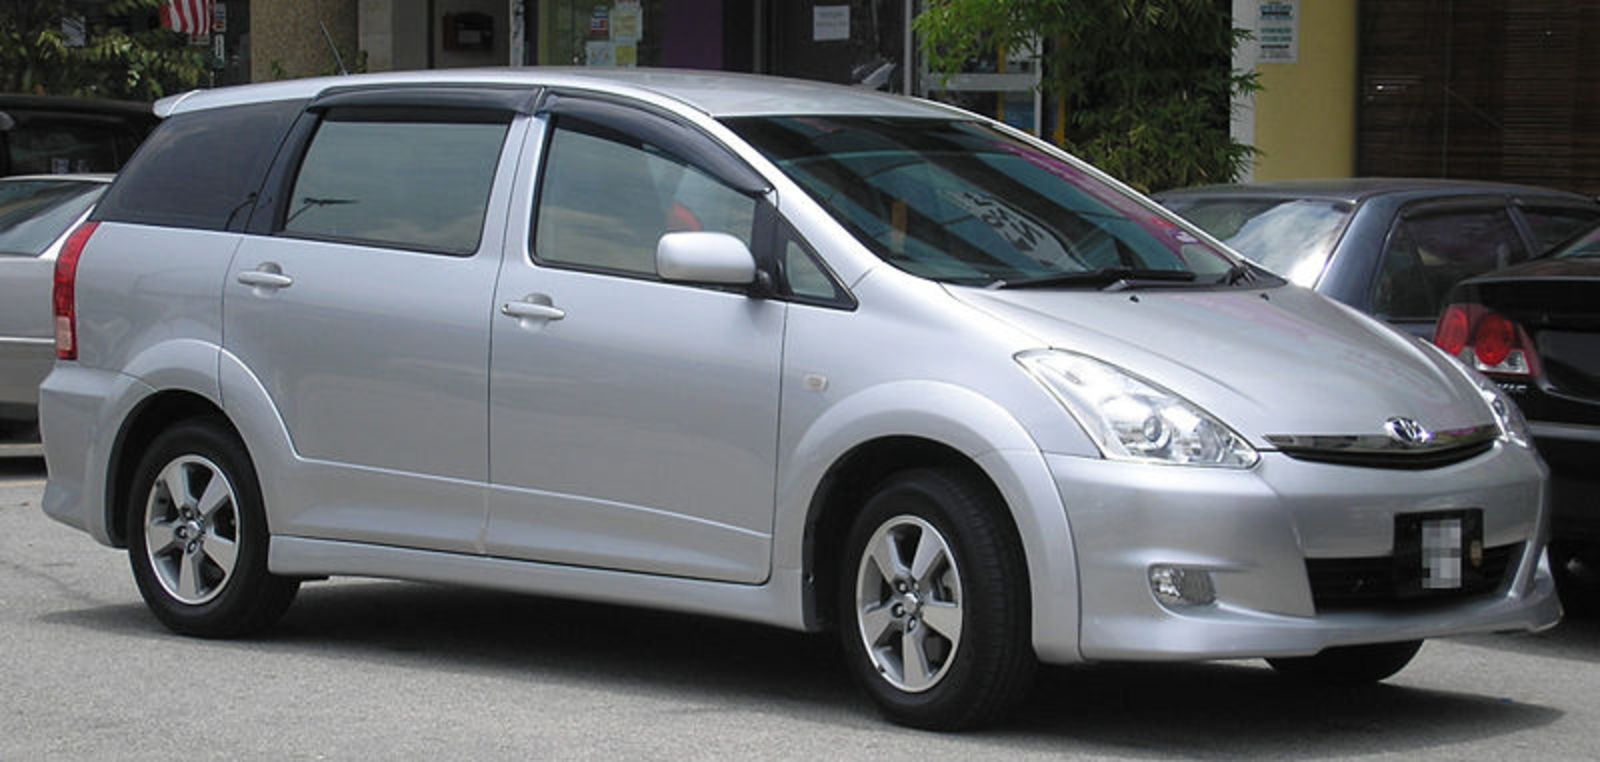 The Toyota Wish is preferred by many Kenyans since it has ample space on the